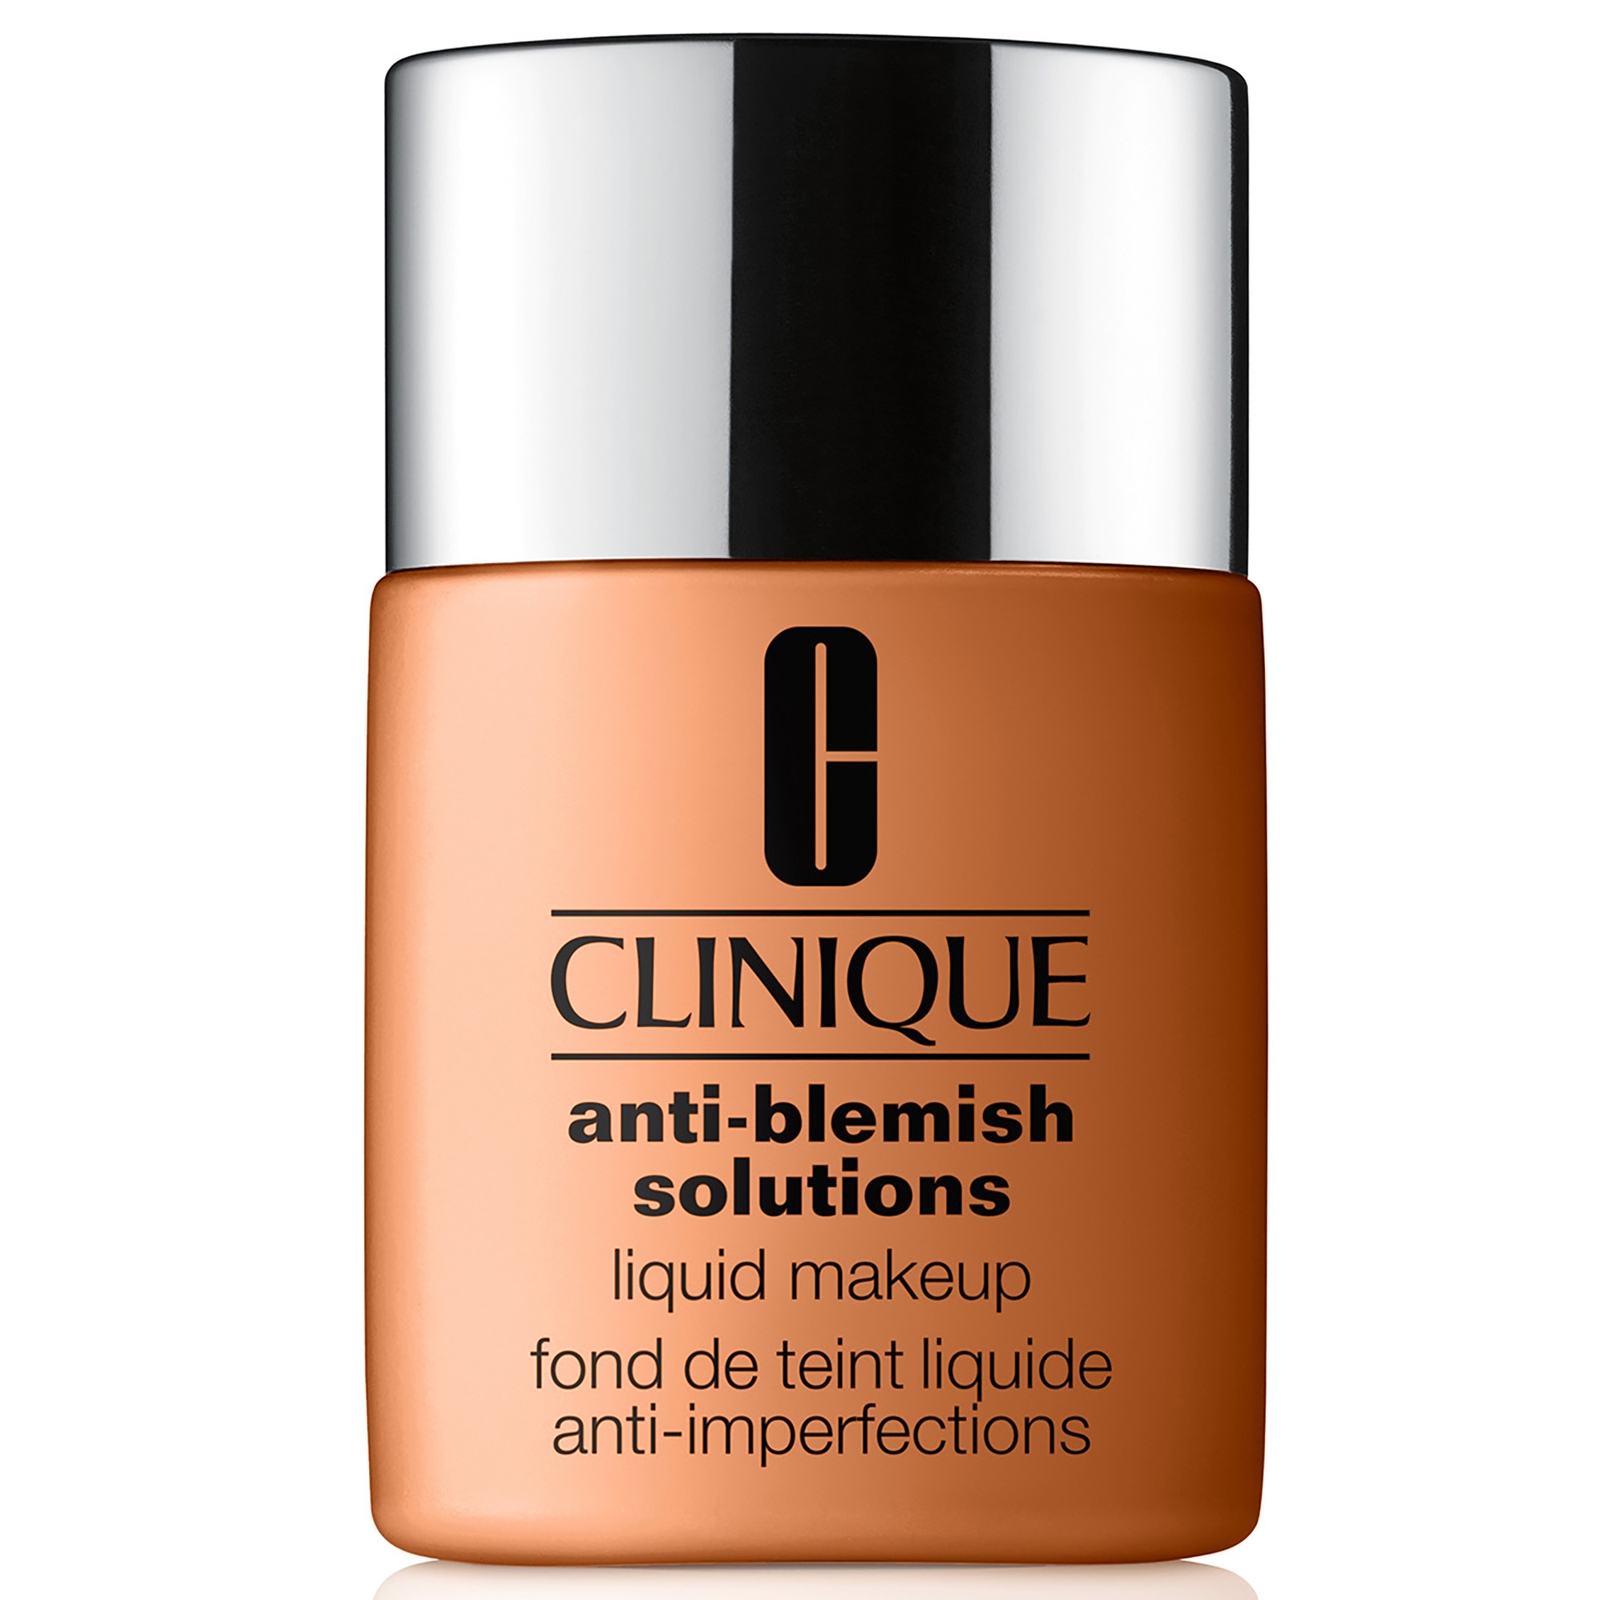 Clinique Anti-Blemish Solutions Liquid Makeup with Salicylic Acid 30ml (Various Shades) - WN 76 Toas